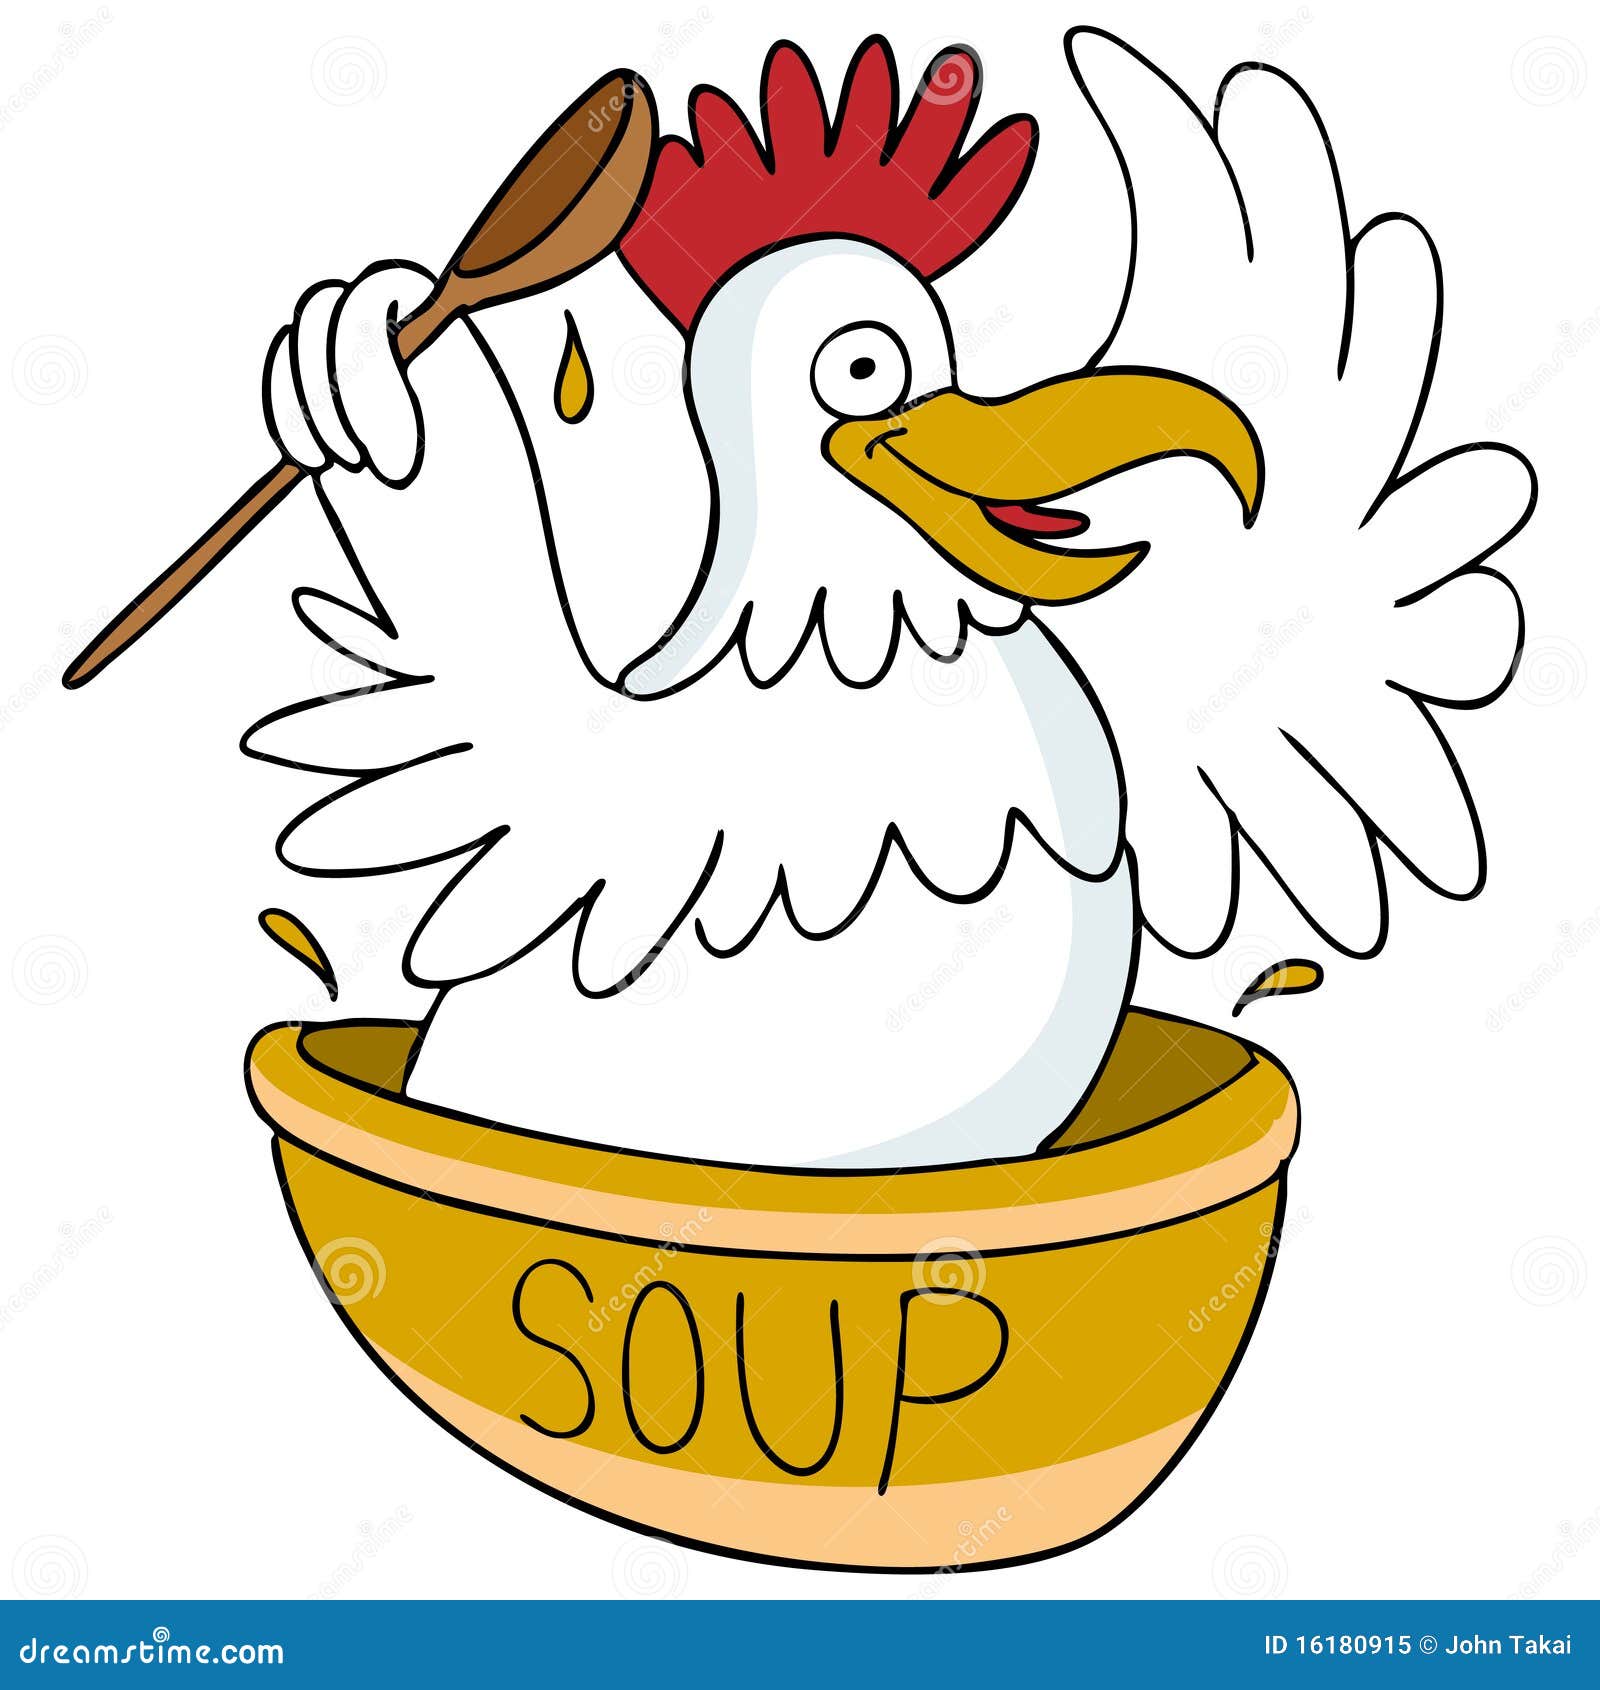 clipart chicken soup - photo #33